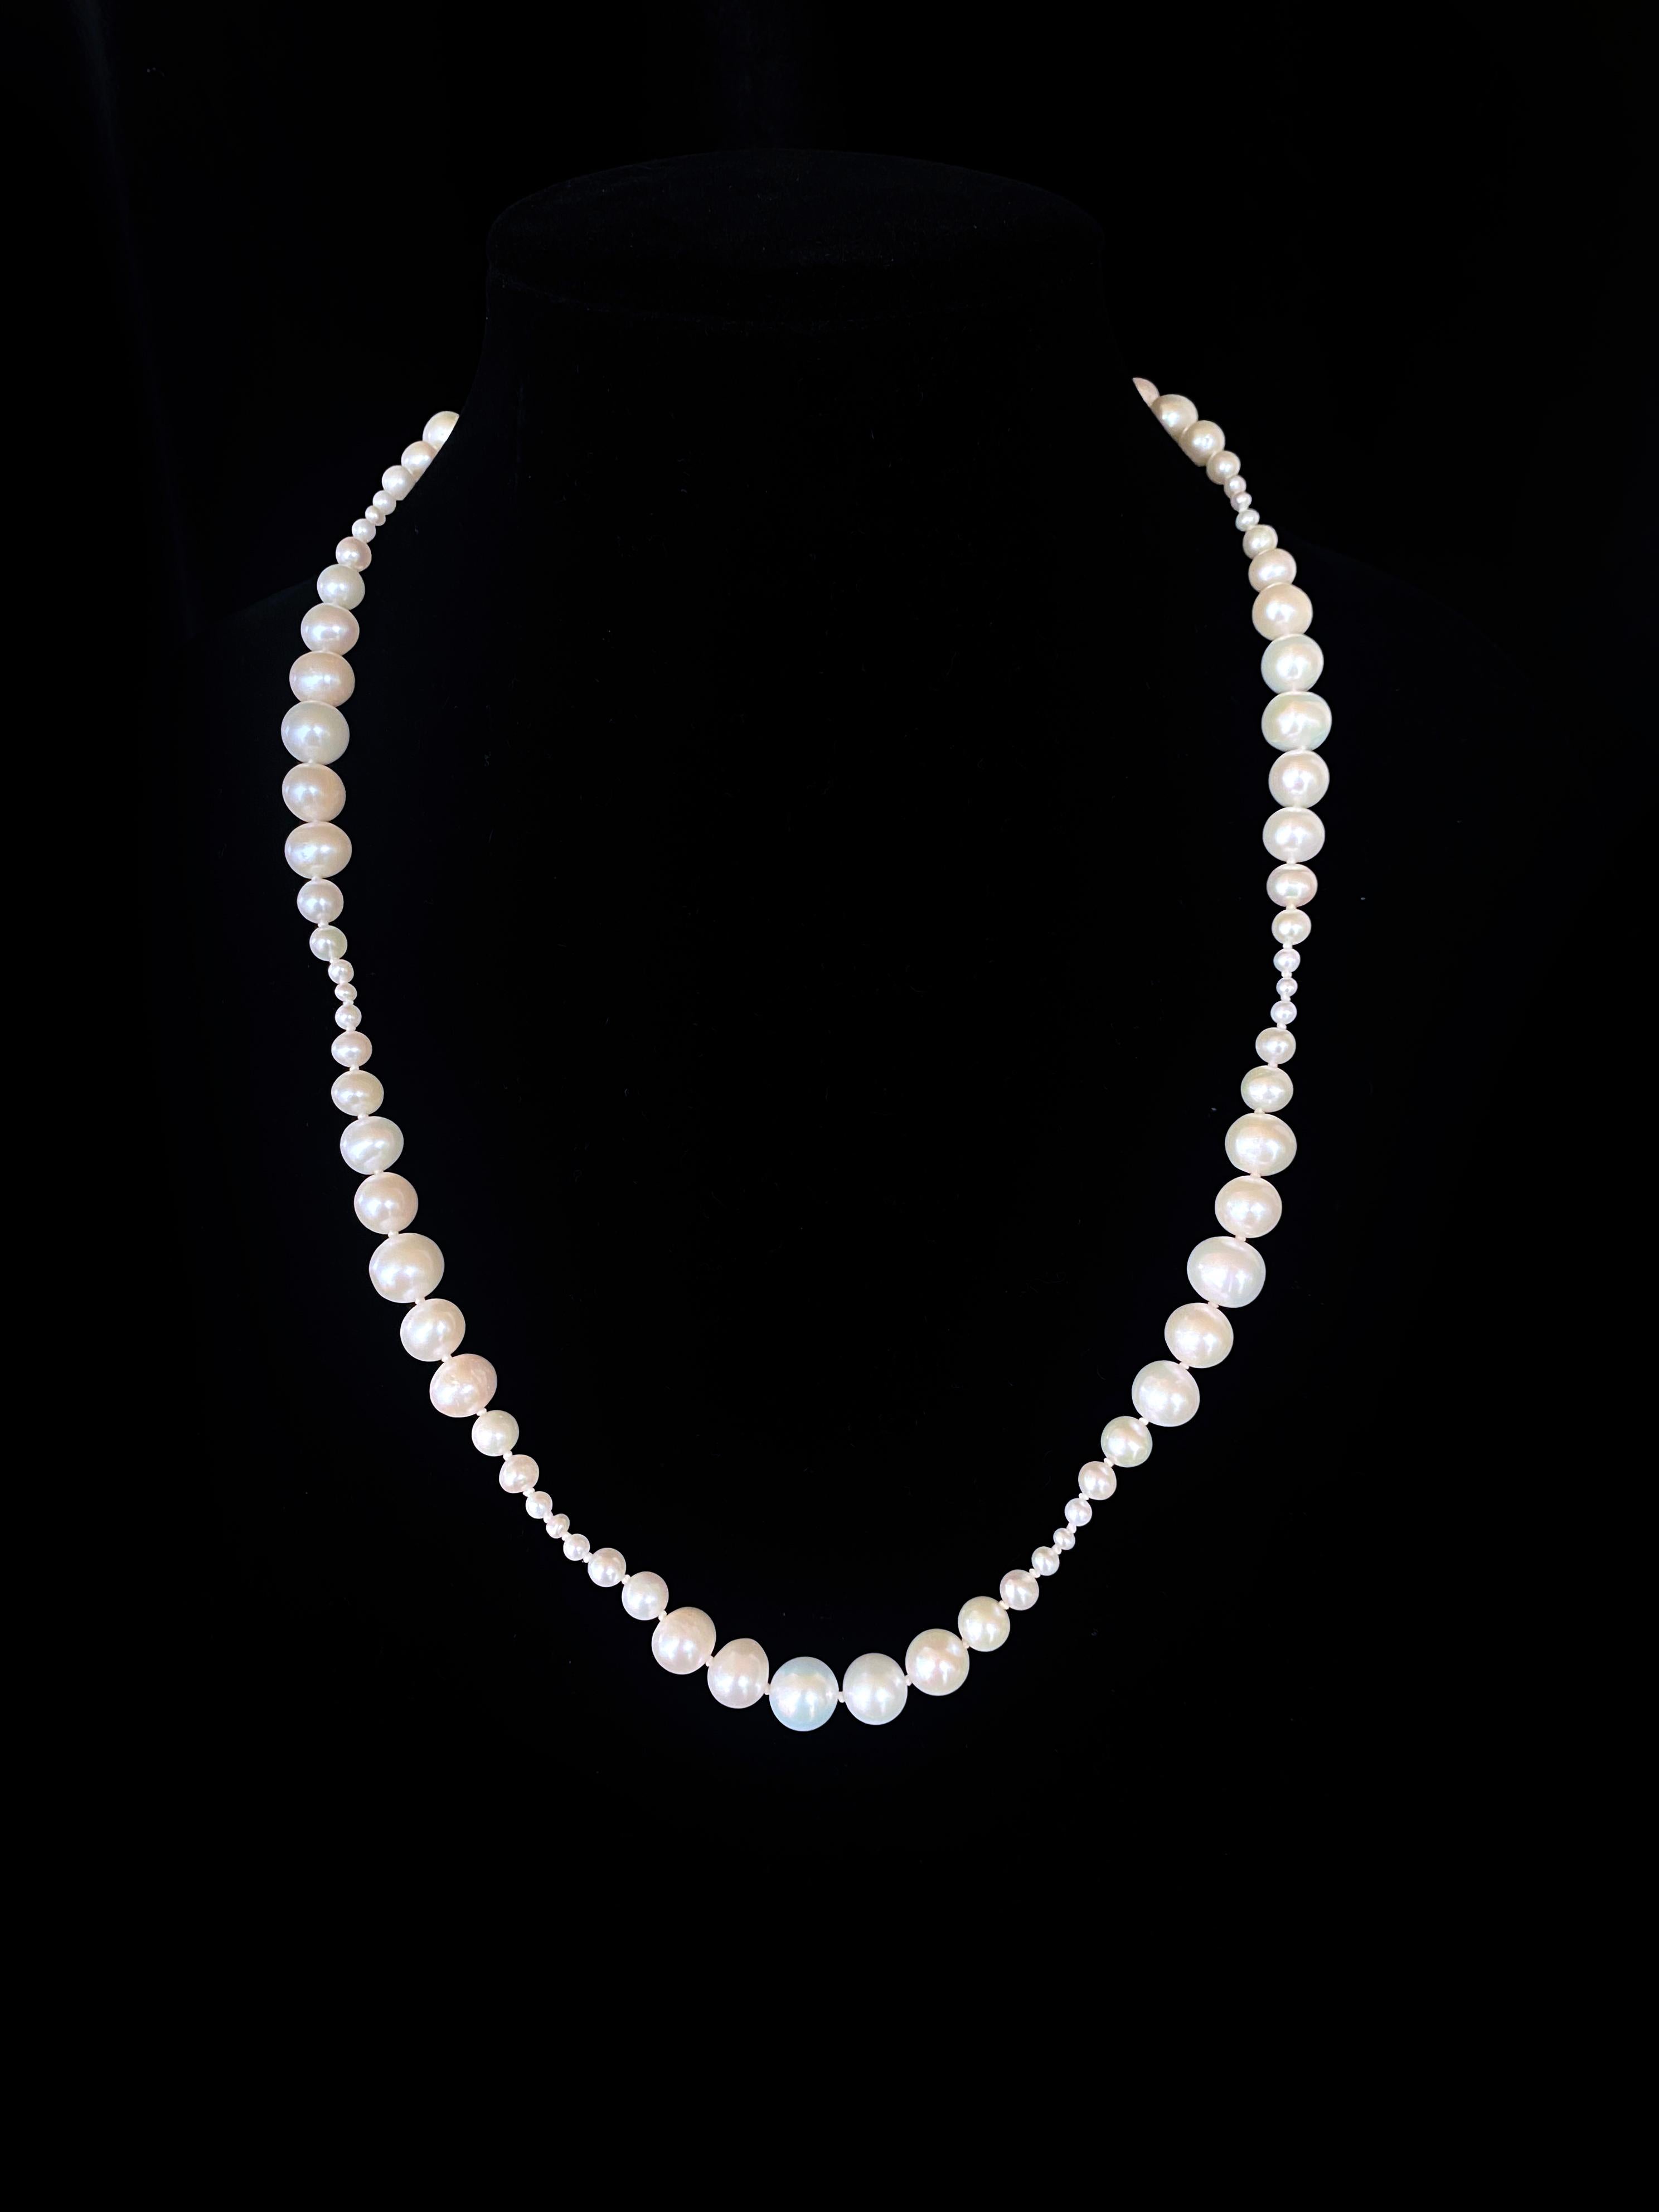 Made by Marina J. This necklace is made using high luster White Pearls which display a great iridescent sheen to them, all strung together into a unique piece. Multi sized Pearls (2mm to 9mm) are handpicked by Marina to create the perfect Multi